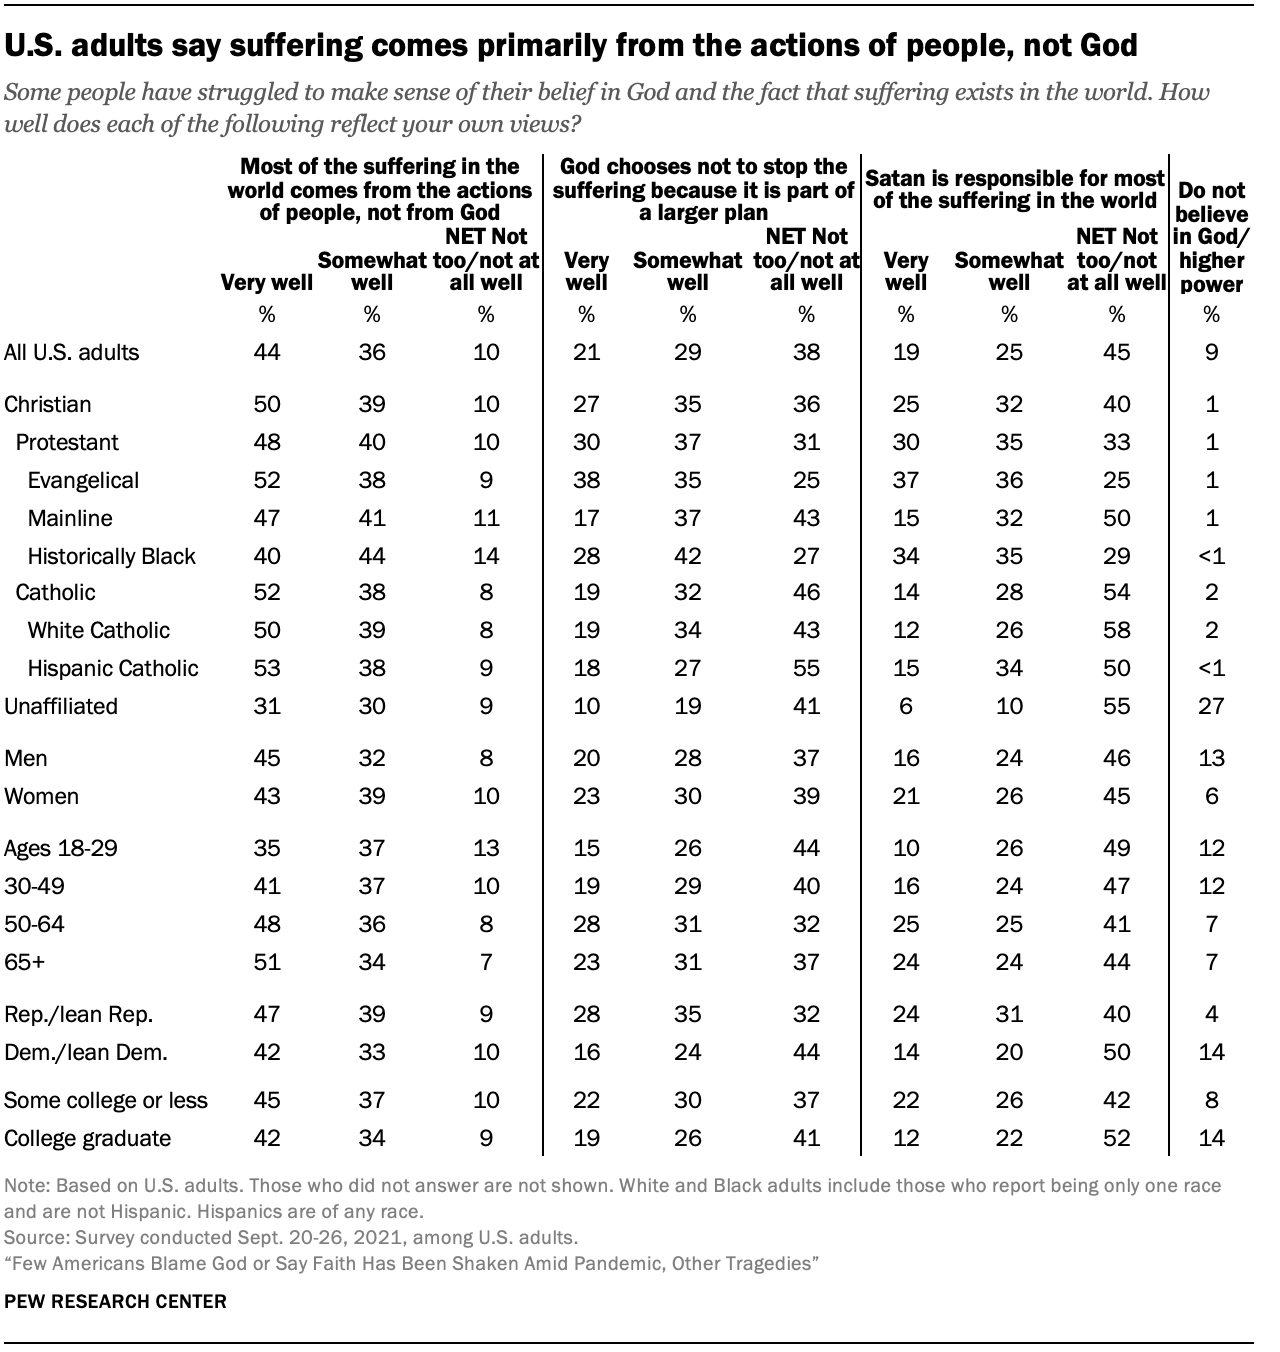 U.S. adults say suffering comes primarily from the actions of people, not God